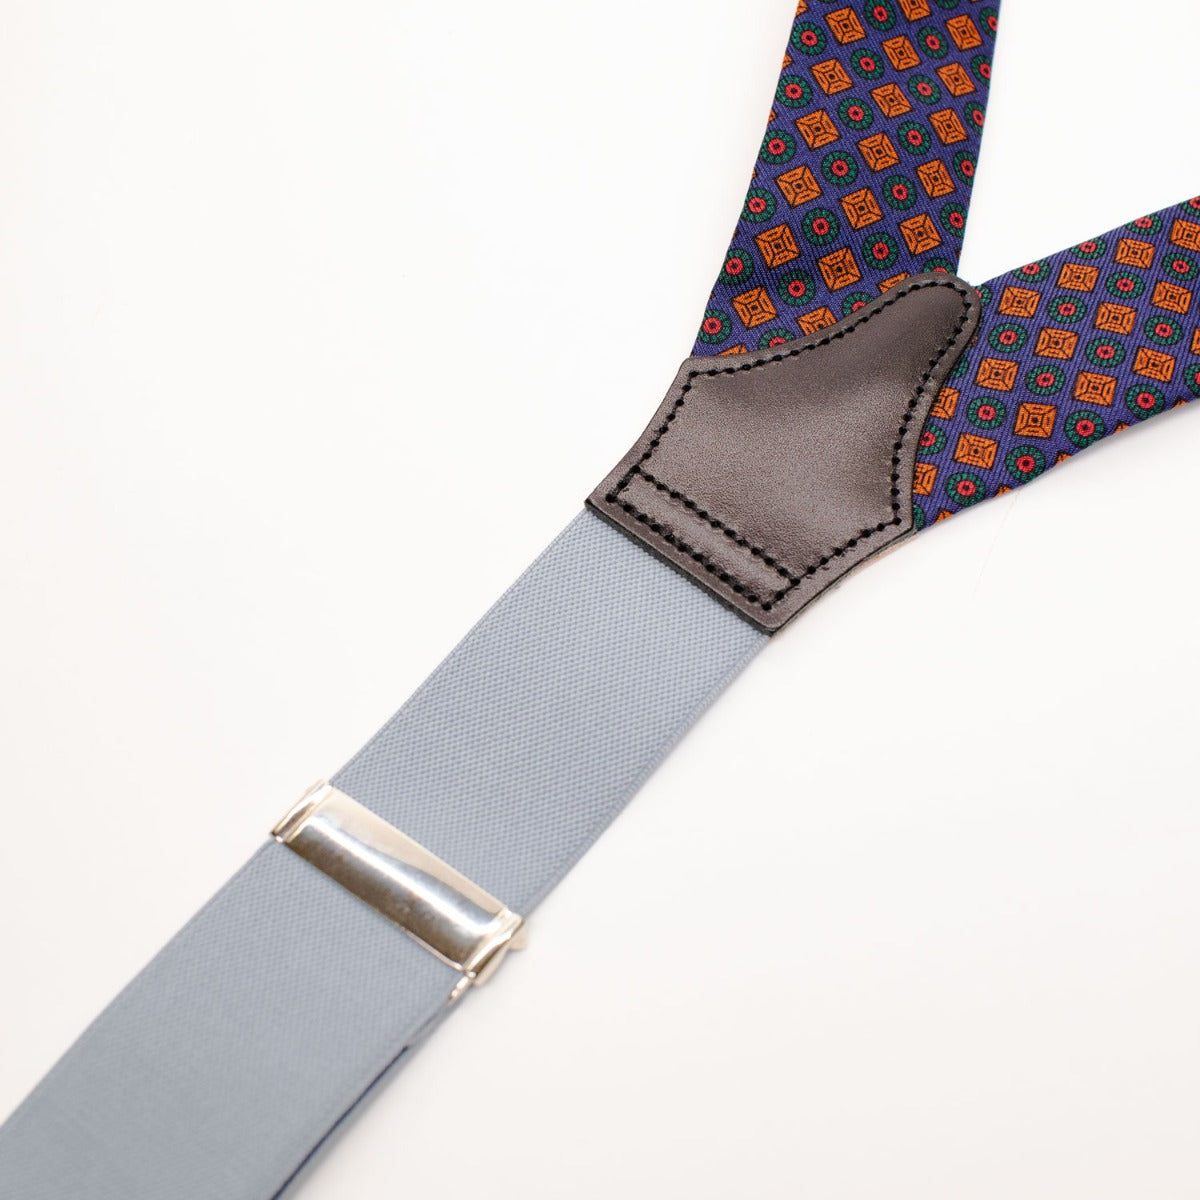 A pair of adjustable blue and orange suspenders with KirbyAllison.com's Sovereign Grade Solid Champagne Braces and a United Kingdom-inspired design.